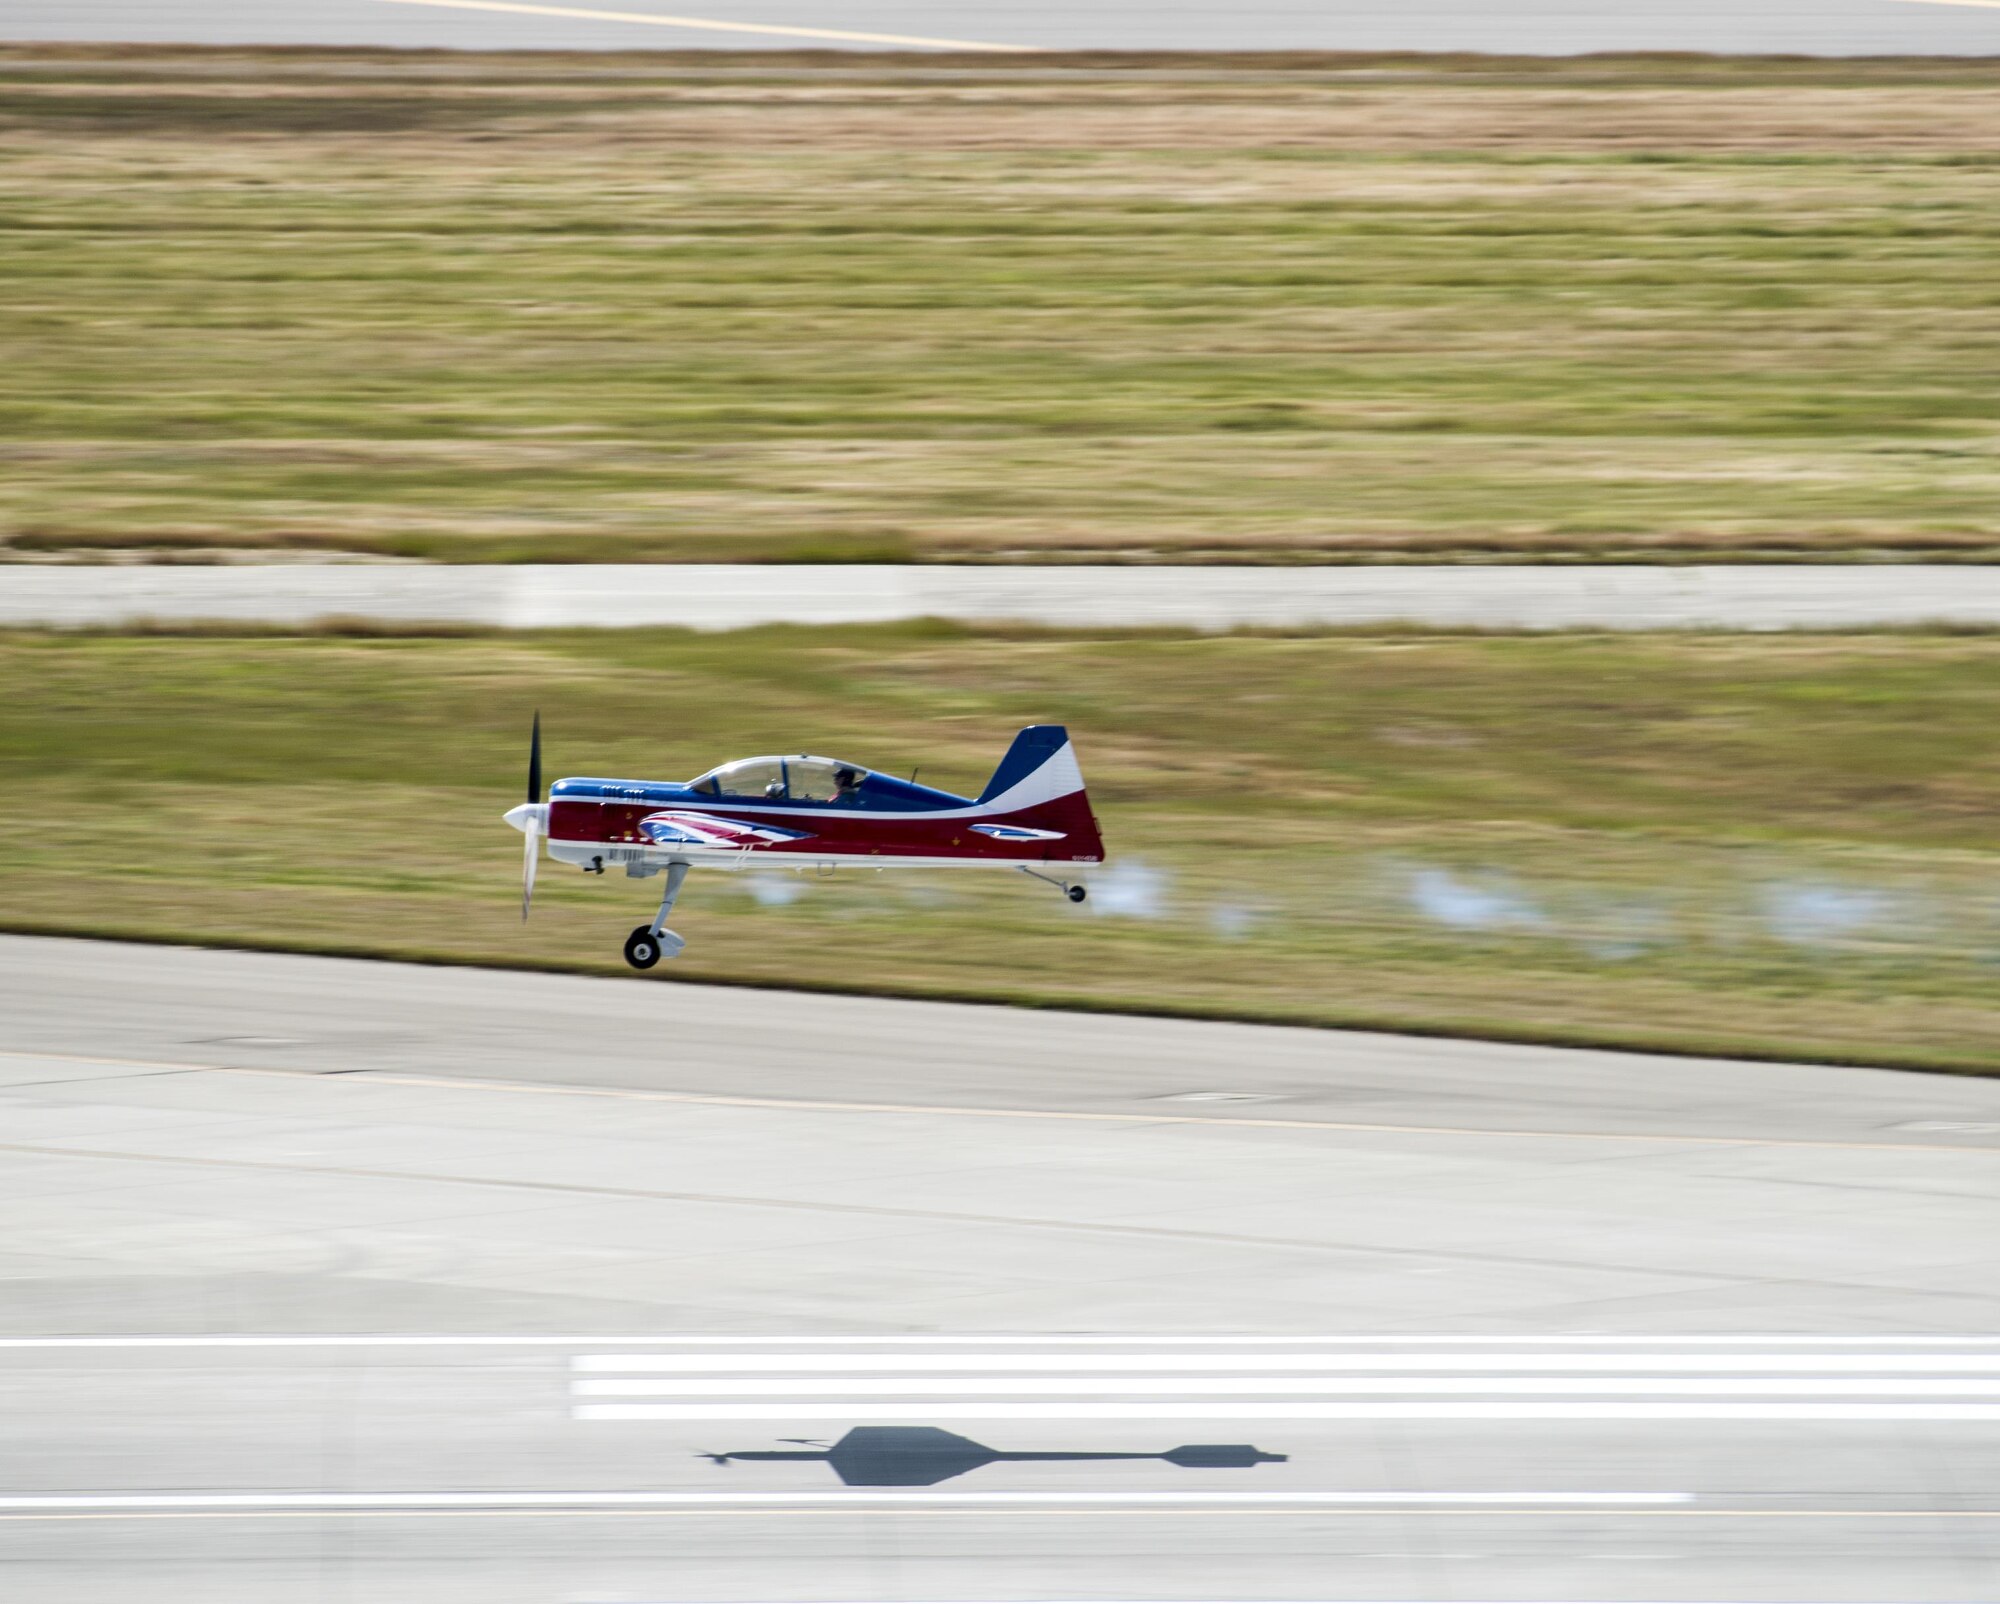 Rich Perkins flys a Russian Thunder YAK-54 during the Wings Over Solano Air Show at Travis Air Force Base, Calif., May 6, 2017. The two-day event featured performances by the United States Air Force Thunderbirds aerial demonstration team, flyovers and static displays. (U.S. Air Force photo by David Cushman)